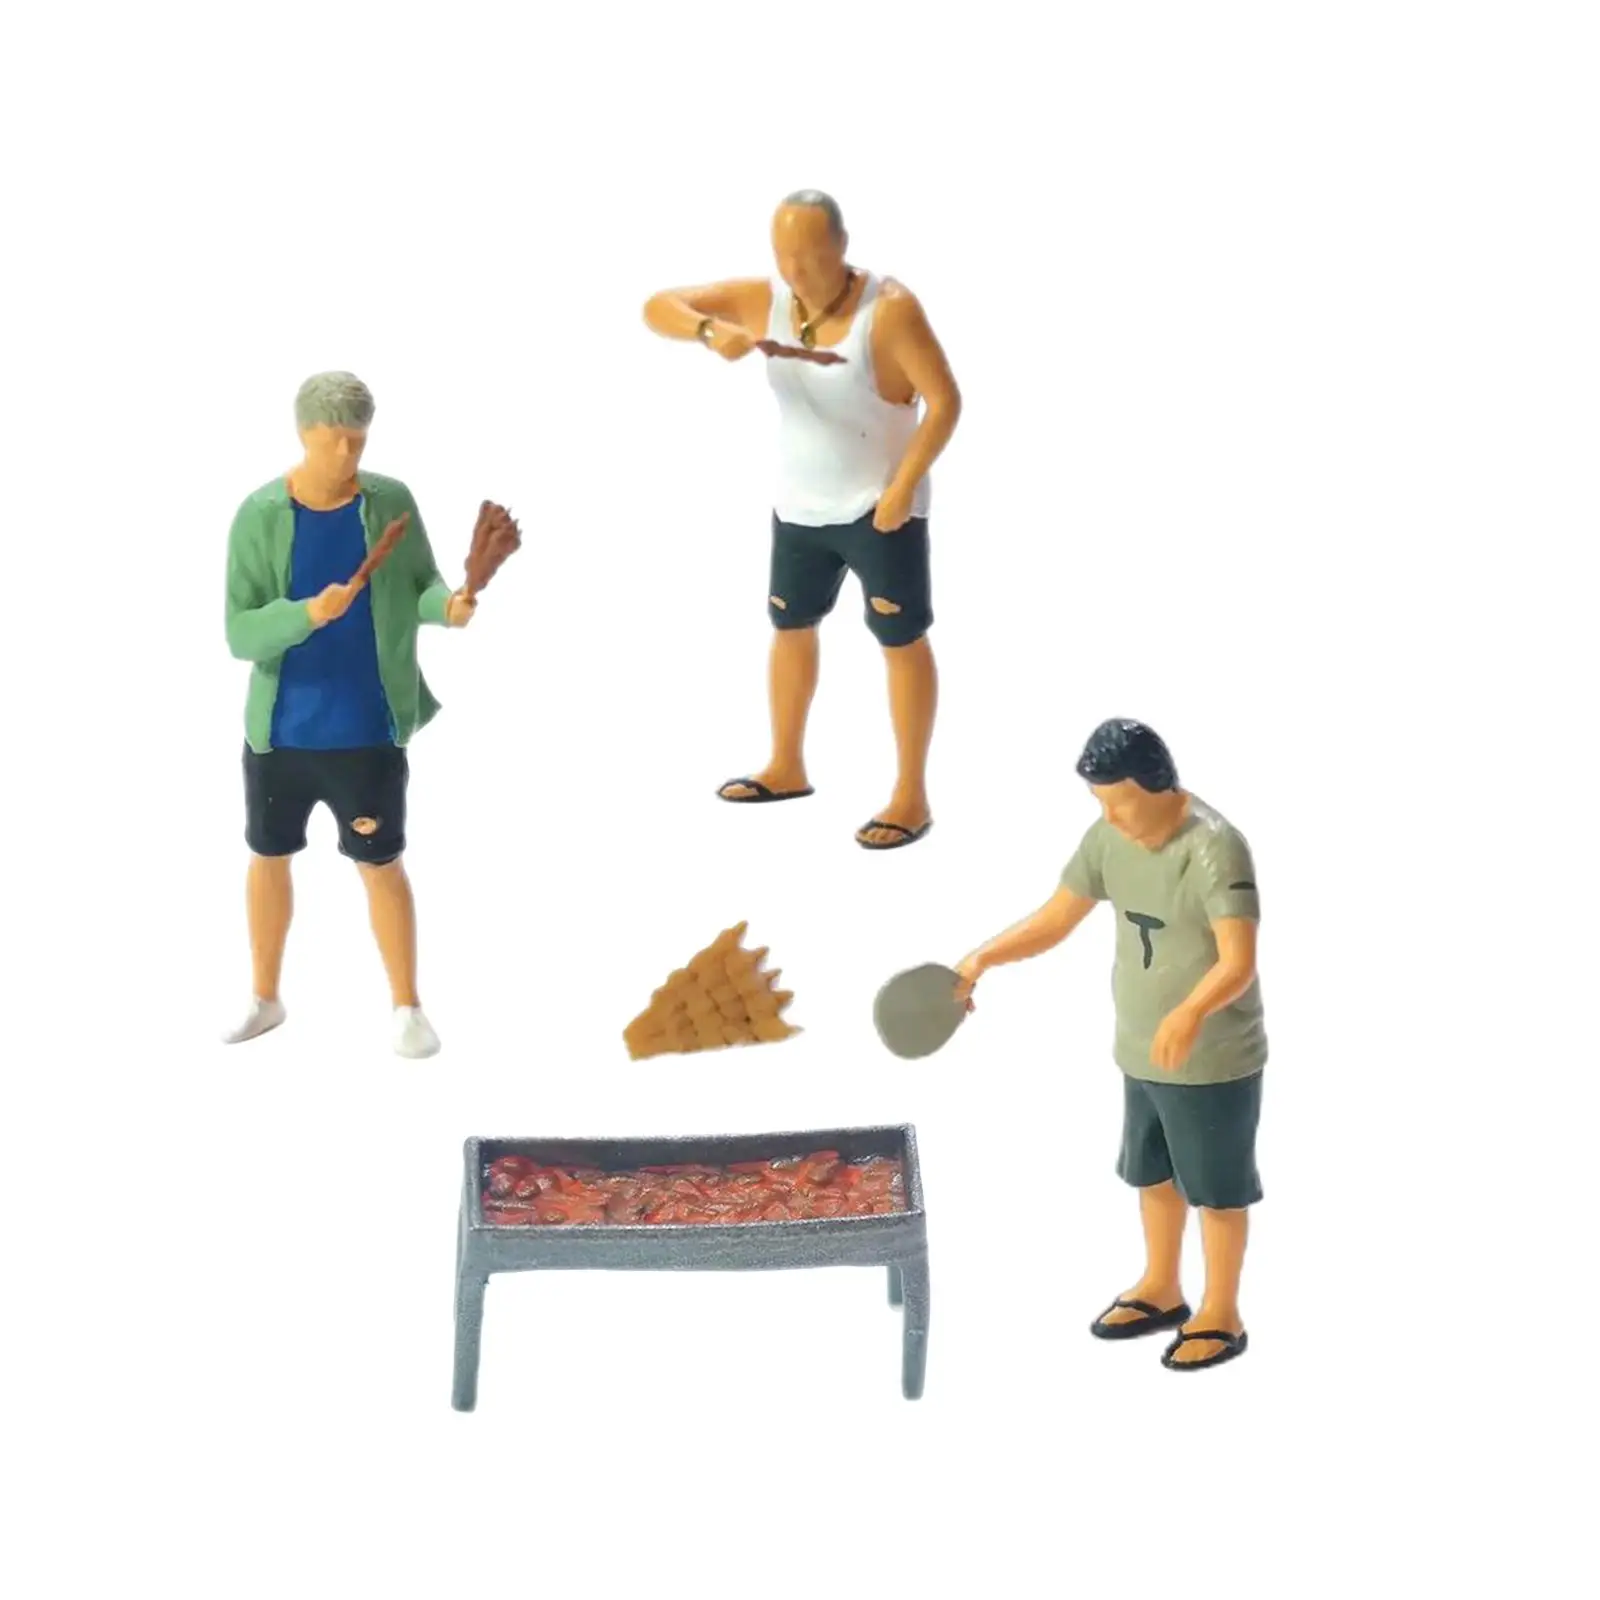 5x 1/64 BBQ Figure Model S Scale Movie Props Collections Layout with Accessories Train Railway Miniature Dioramas Decoration